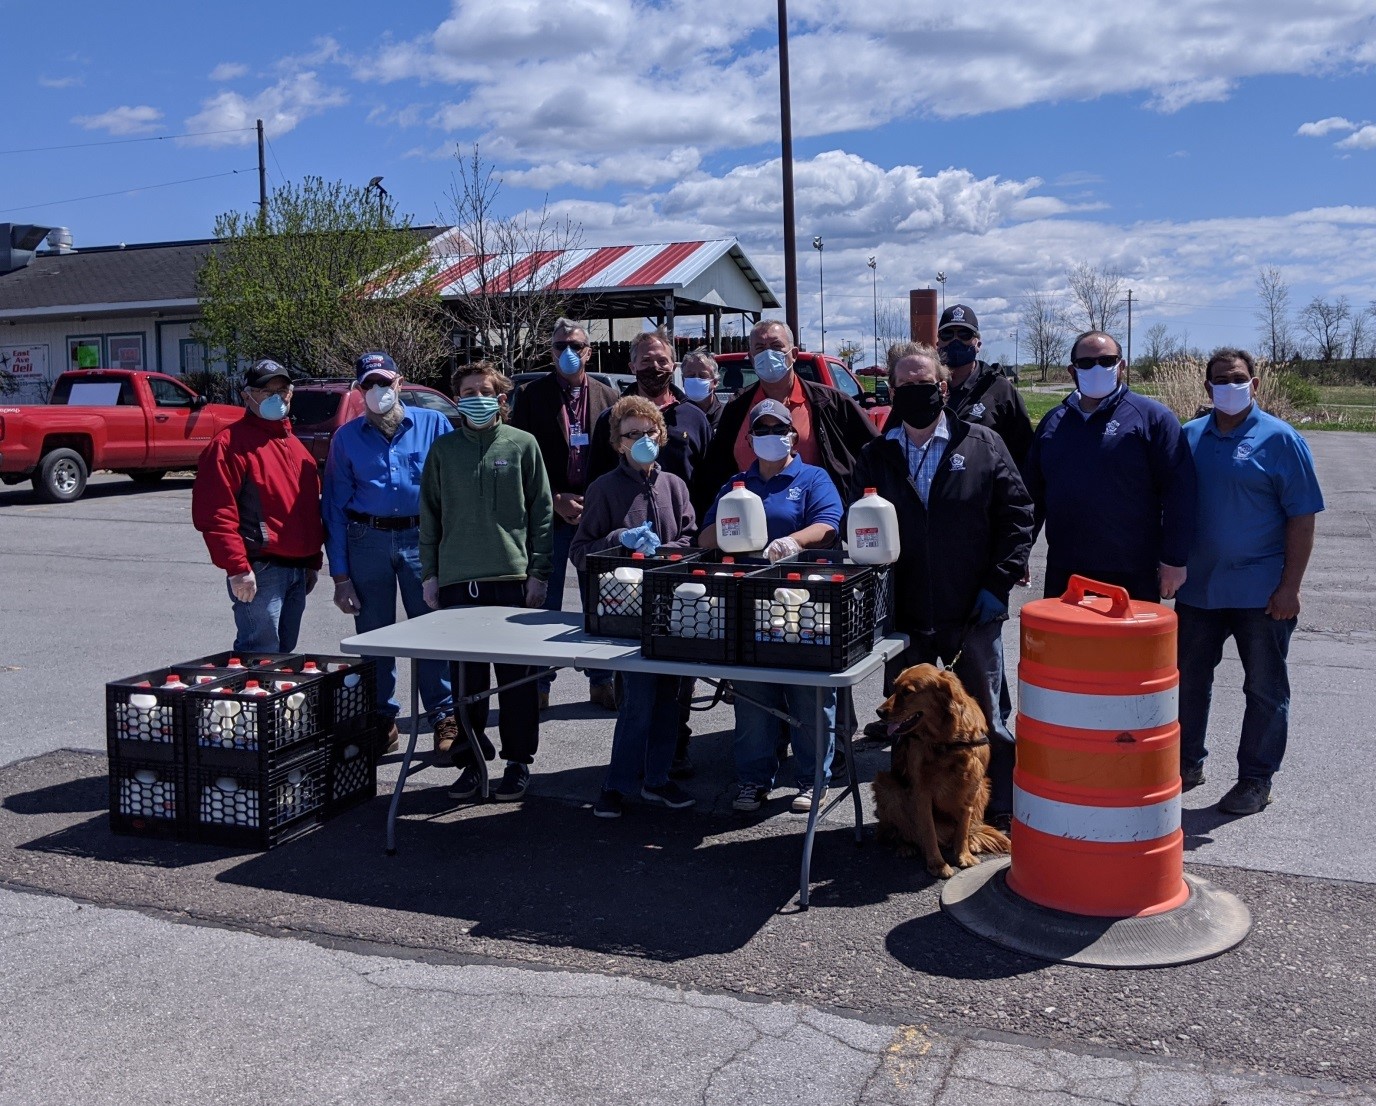 Today, we were able to give away hundreds of gallons of milk in Central Square. Thanks to everyone who came out to get milk and to everyone who helped with the event - Oswego County legislators, Town of Hastings officials and my staff.  Overall, it was a